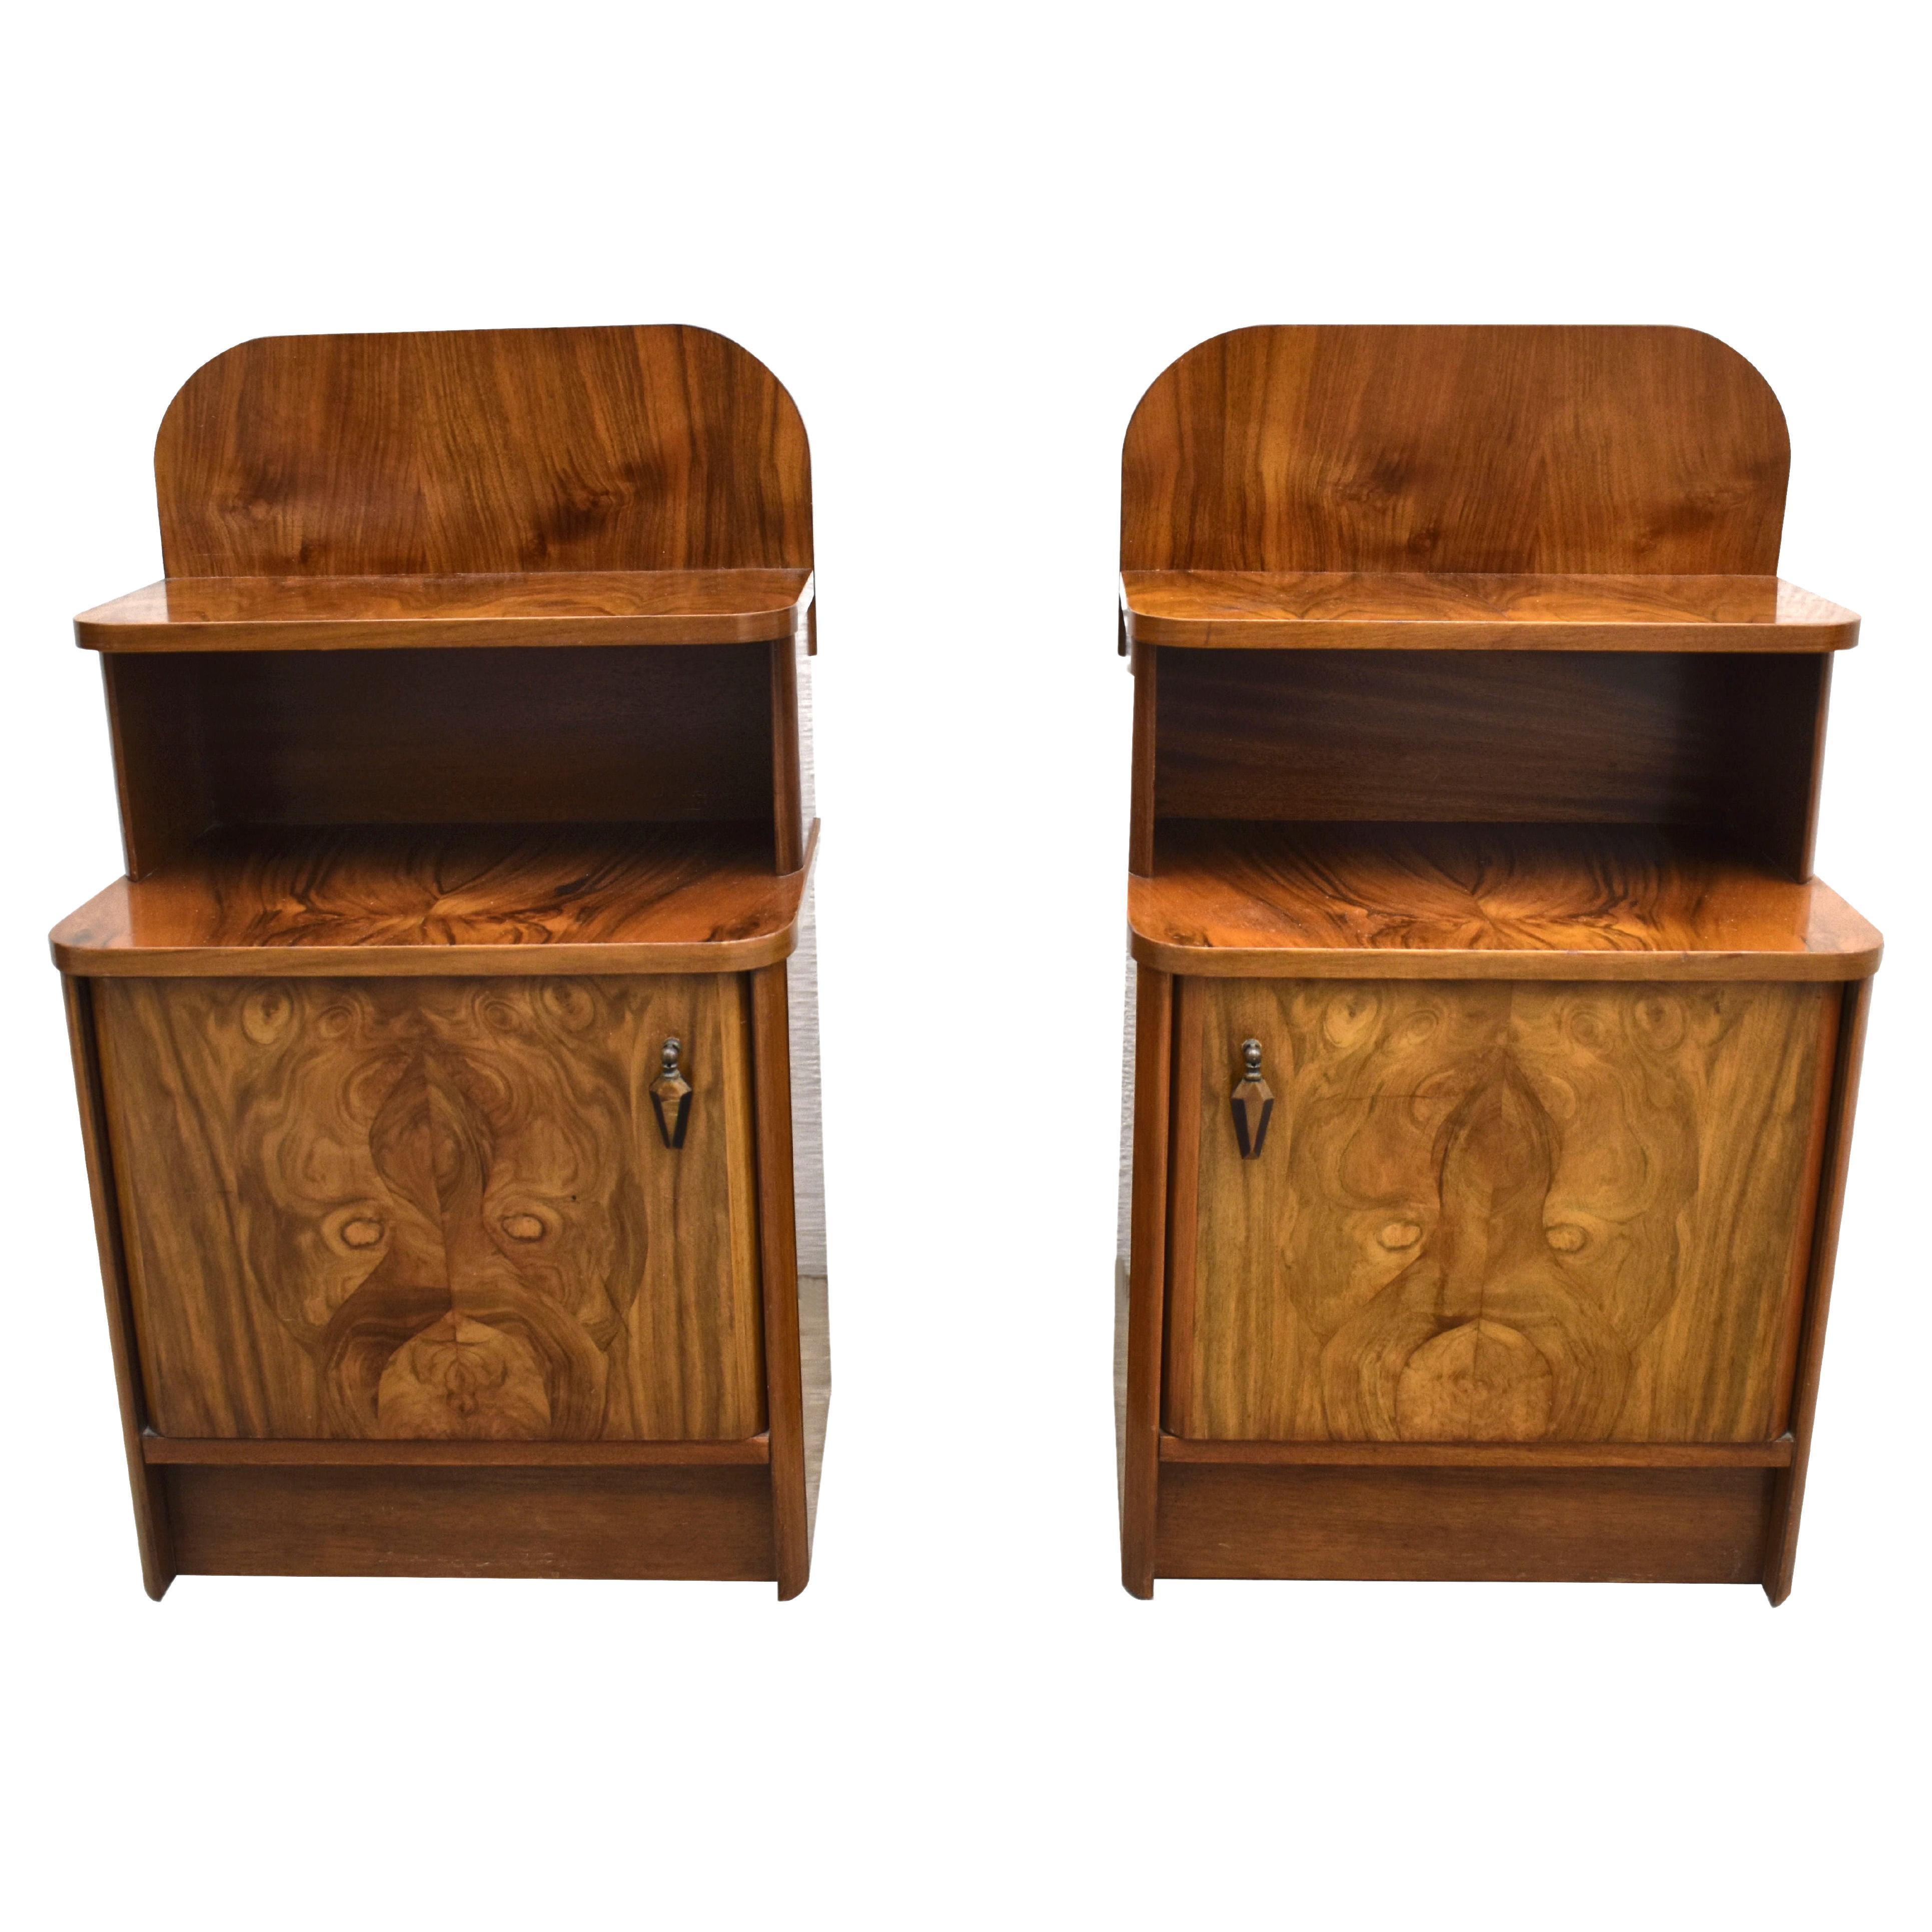 Art Deco Pair of Nightstands, Bedside Table Cabinets in Walnut, England, c1930